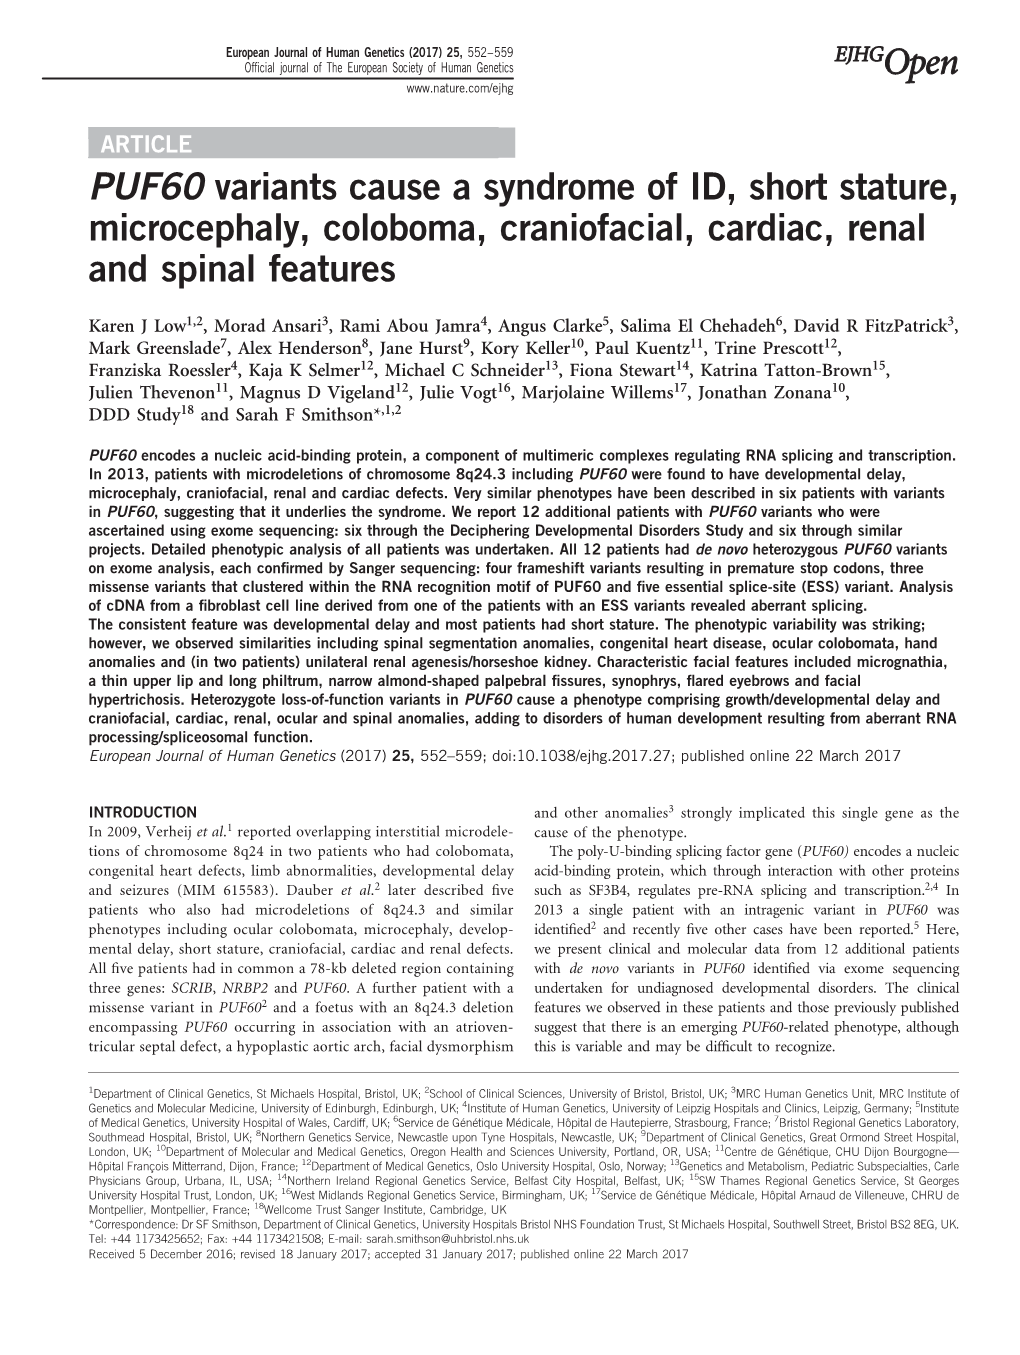 PUF60 Variants Cause a Syndrome of ID, Short Stature, Microcephaly, Coloboma, Craniofacial, Cardiac, Renal and Spinal Features